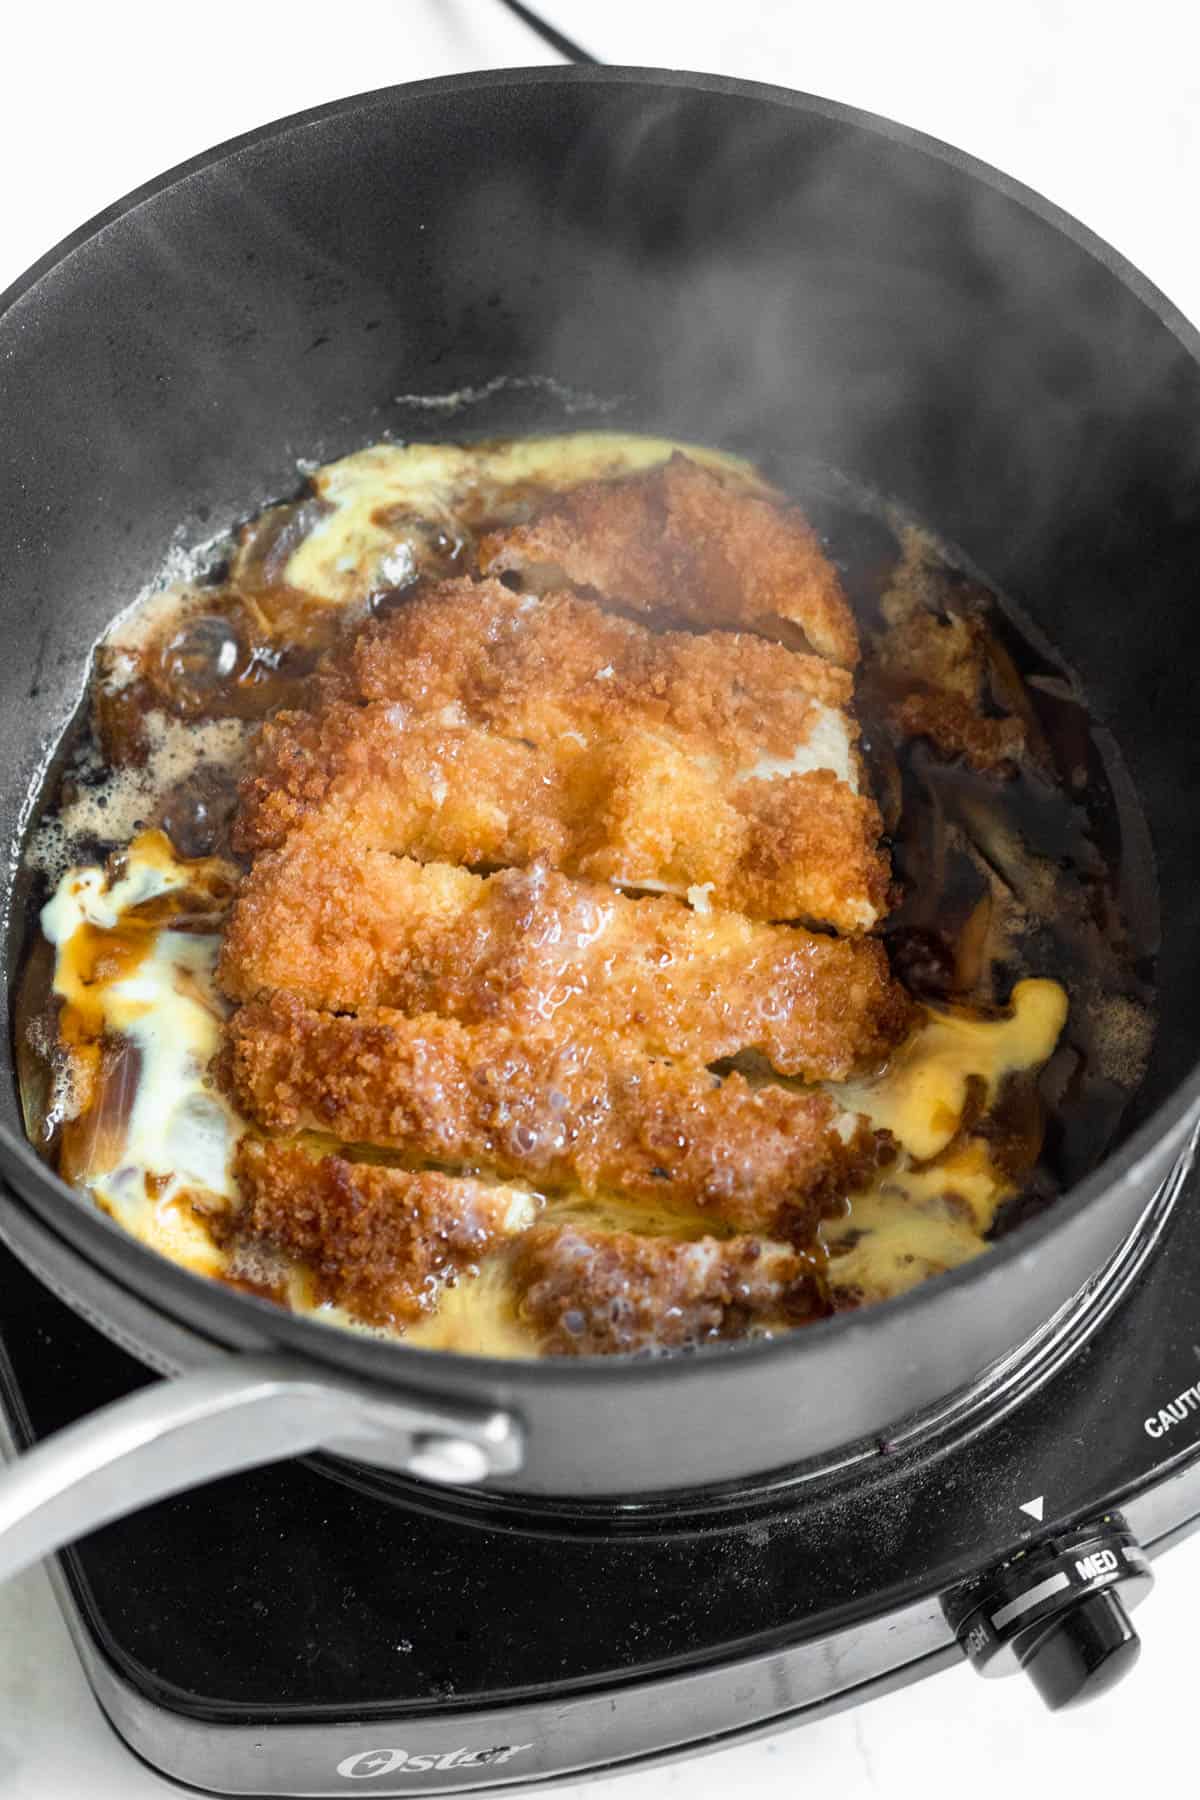 Chicken katsu and a beaten egg added to the onion mixture in the saucepan. 